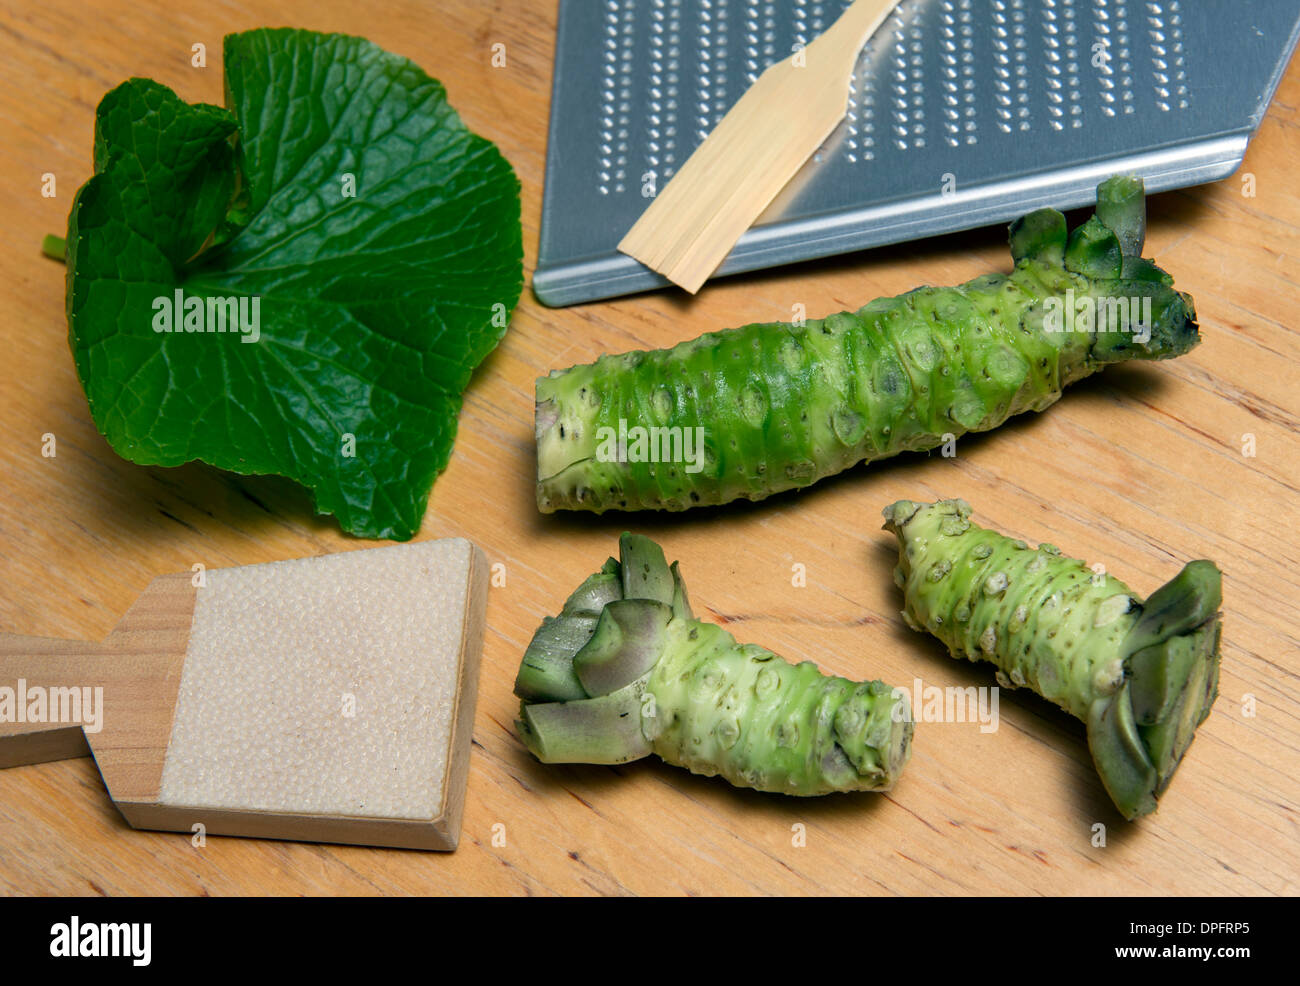 Wasabi growing in spring water with produce manager James Haerper of the Wasabi Company, Dorset, UK Stock Photo